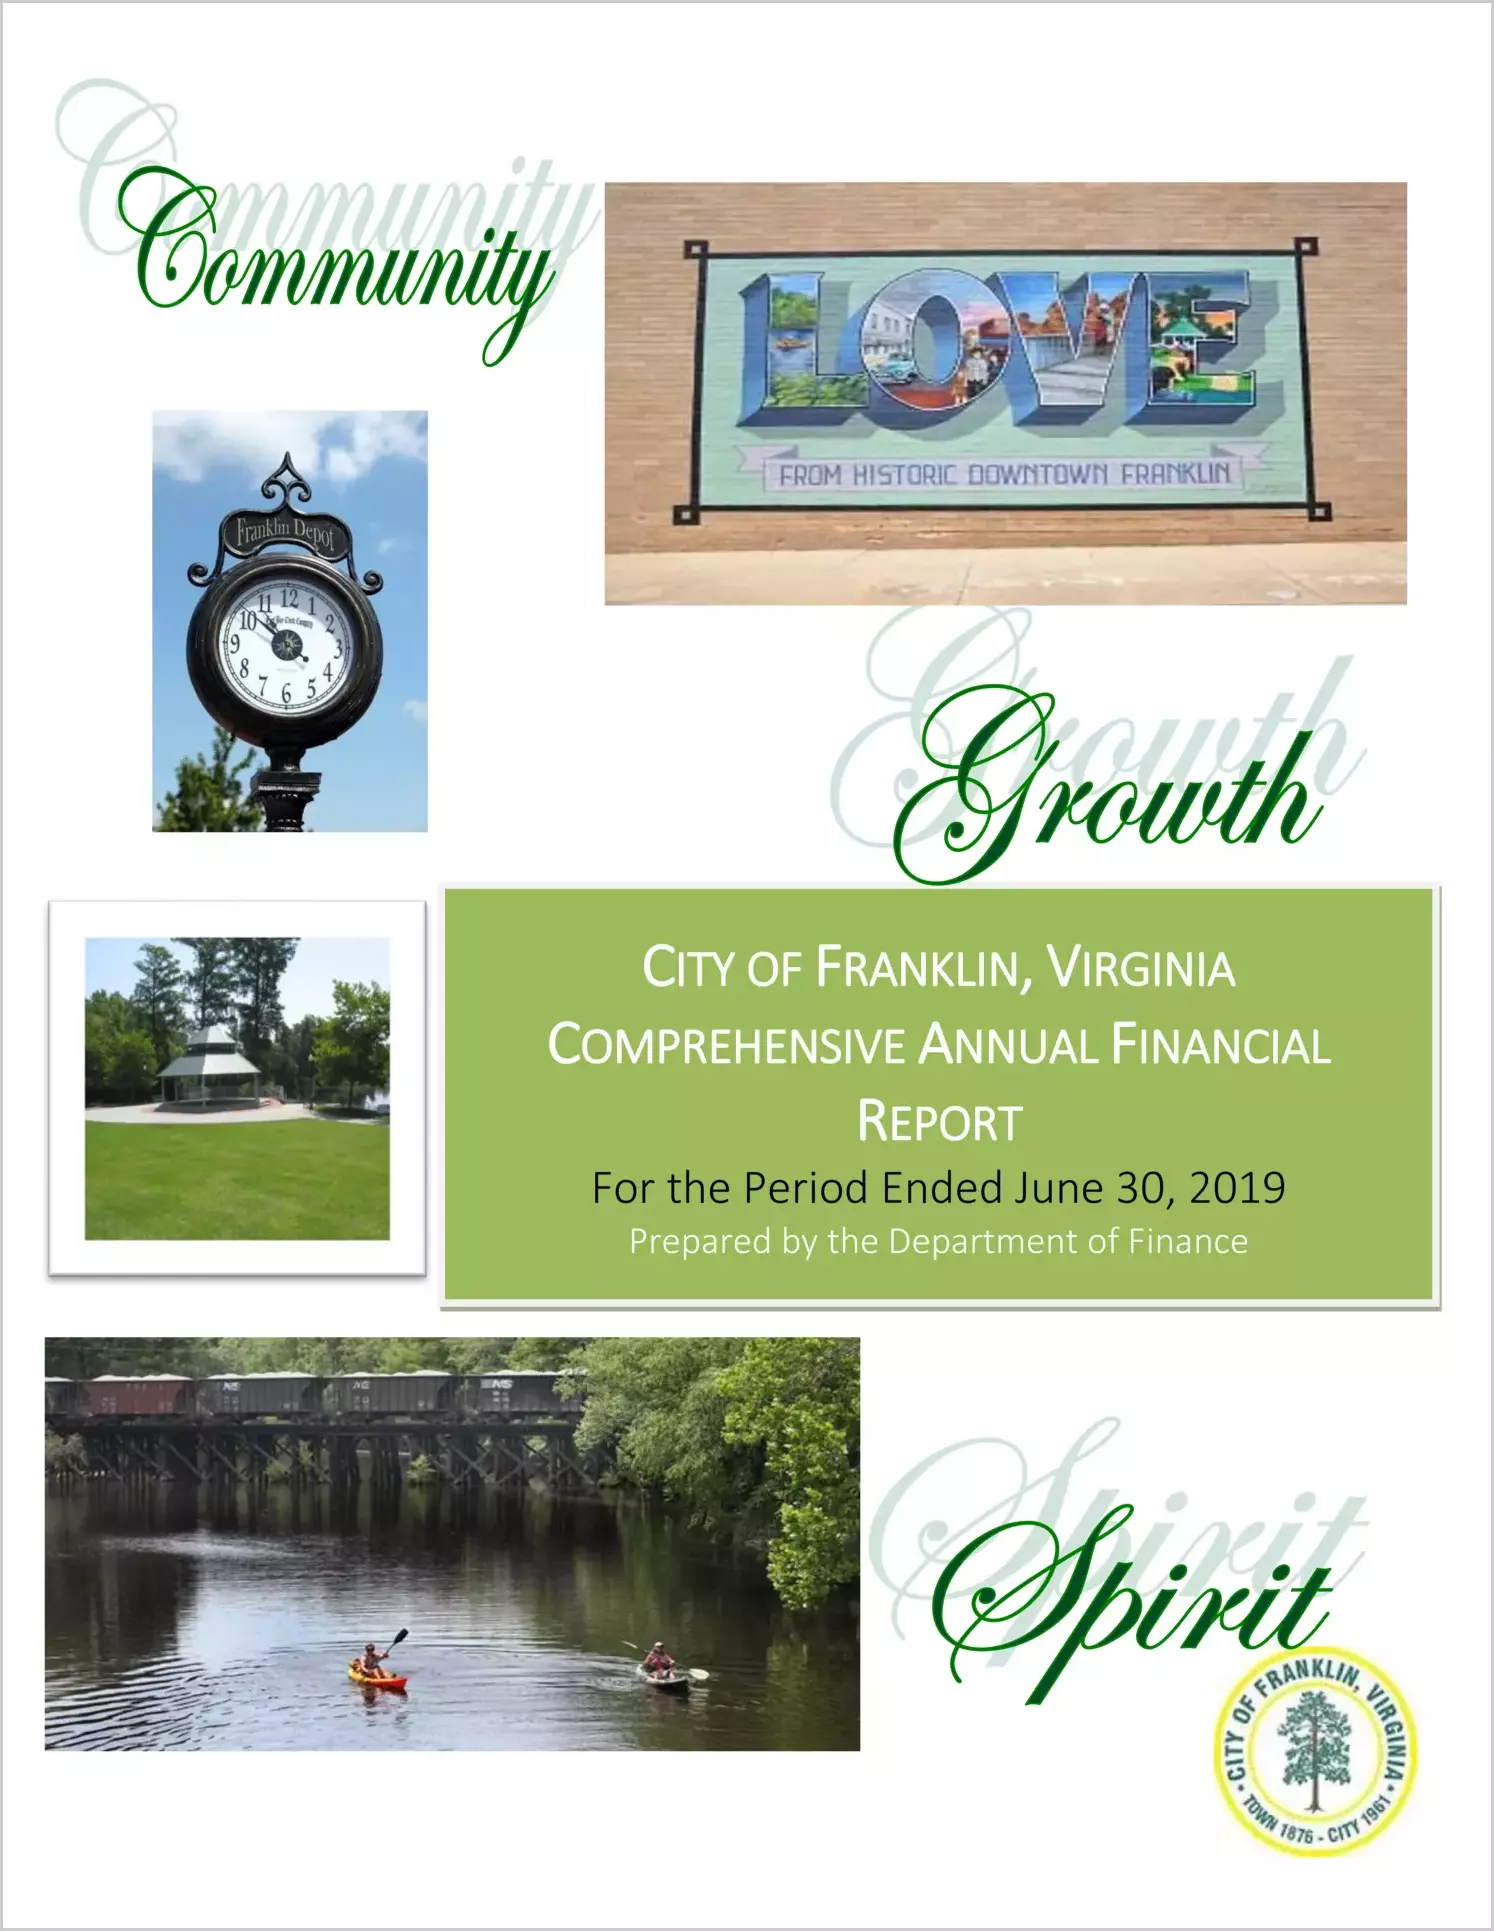 2019 Annual Financial Report for City of Franklin